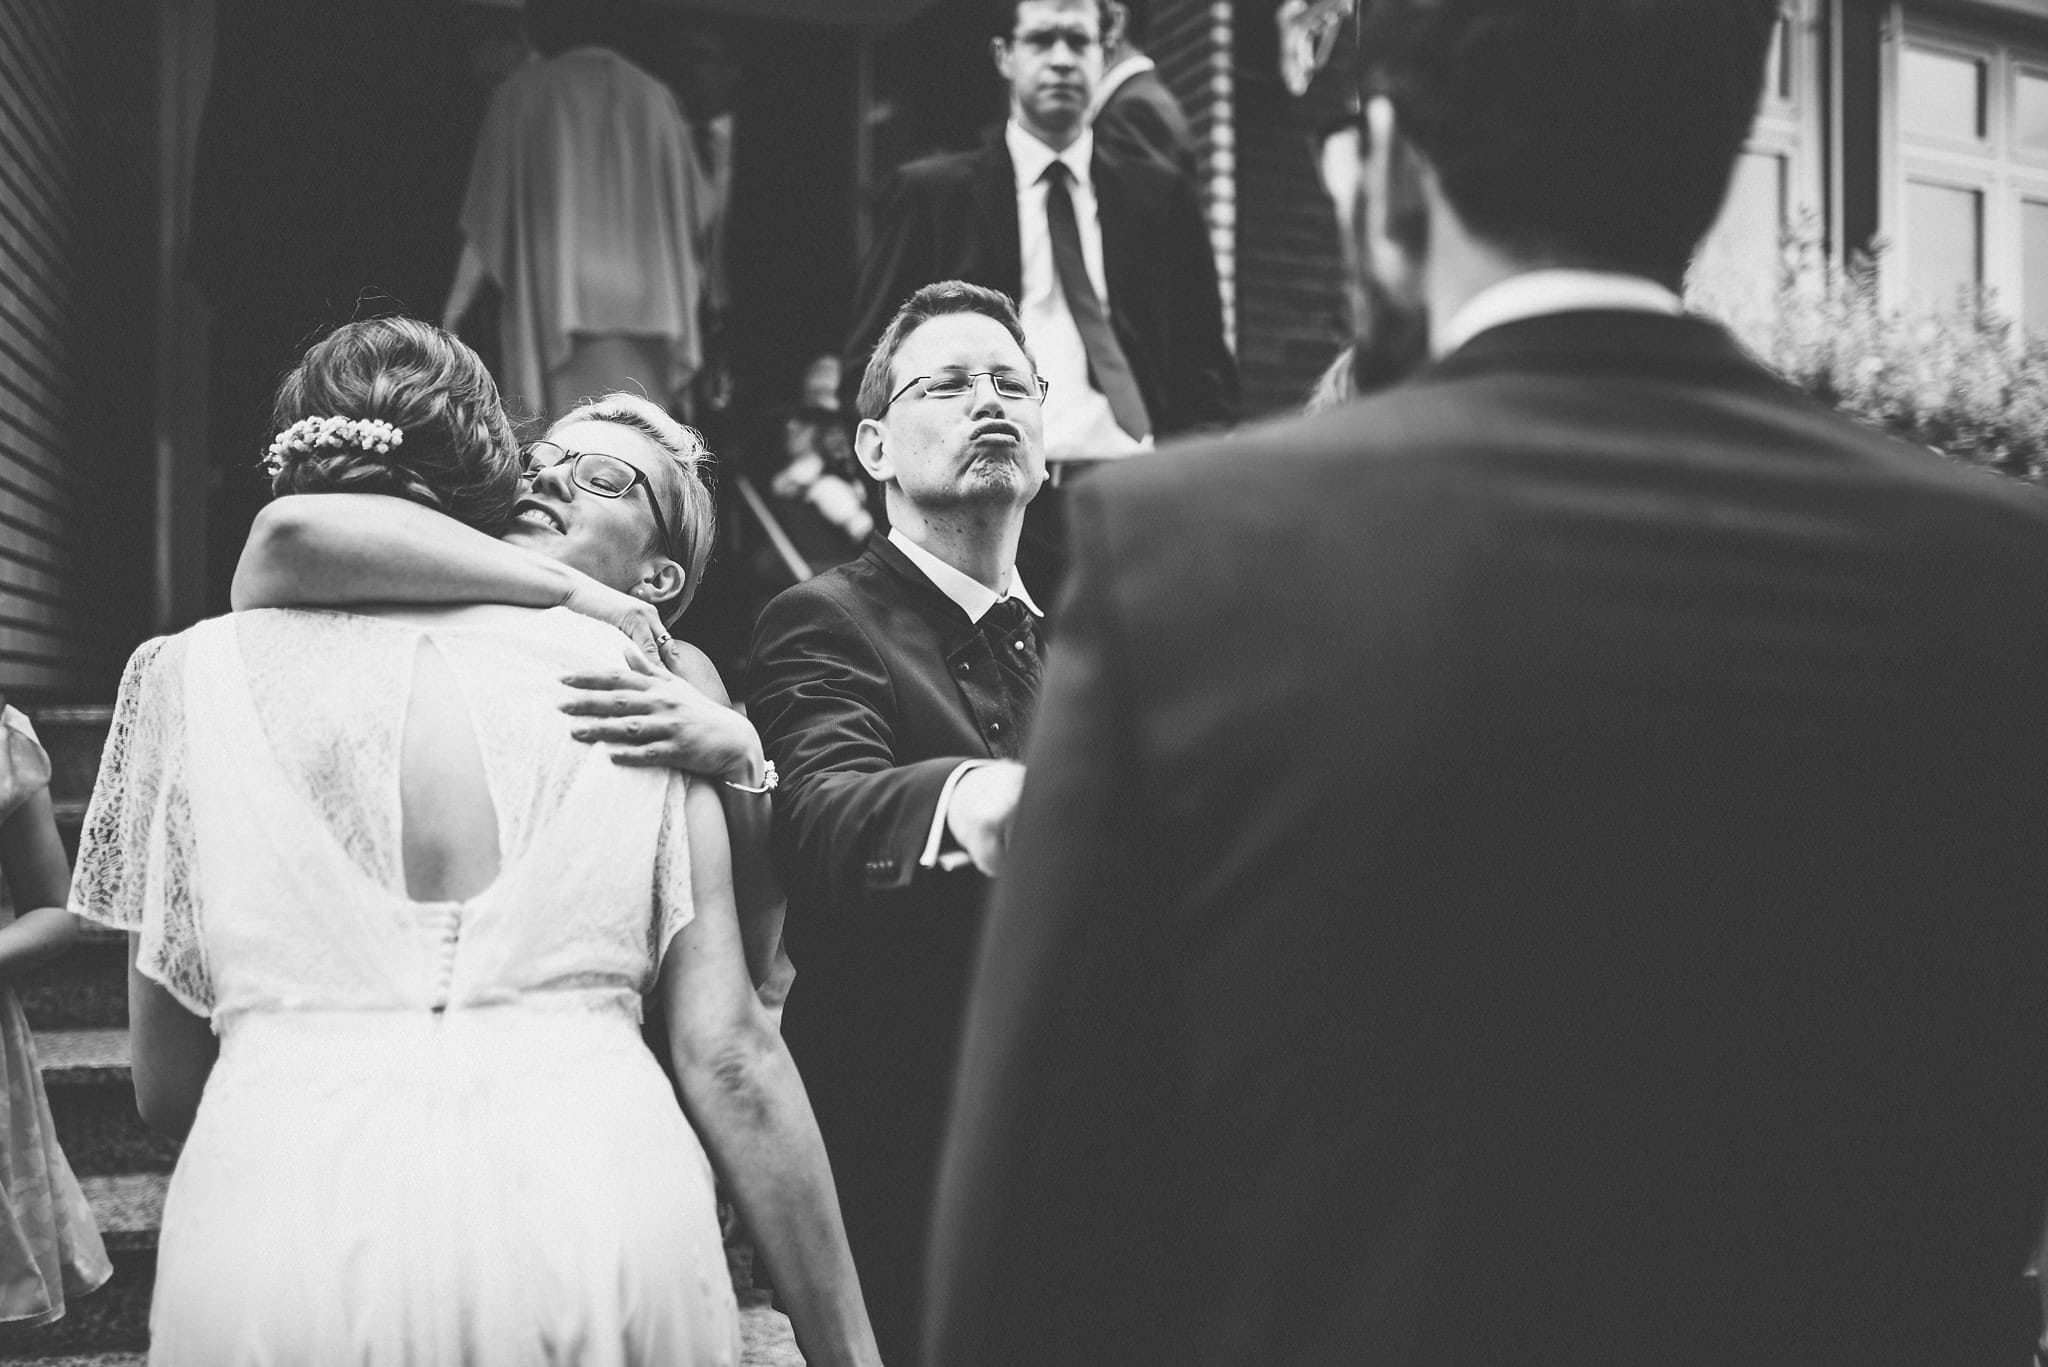 Documentary Wedding Photography by Maria Assia Photography of the bride and groom greeting their wedding guests